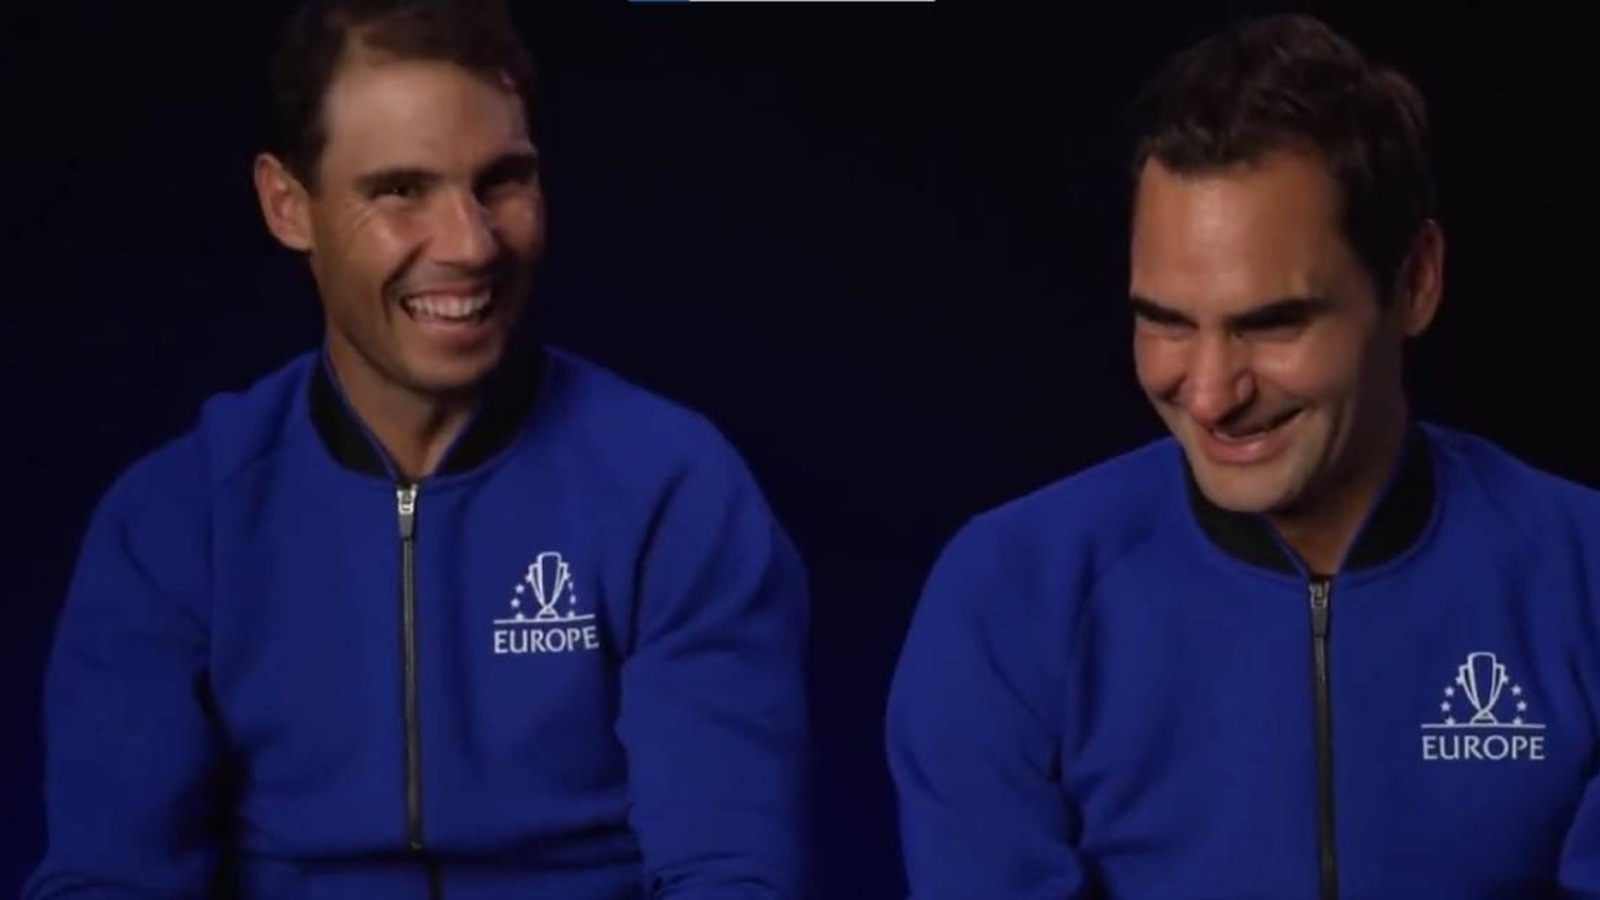 ‘Oh my god! Could you imagine…’: Federer, Nadal’s epic reply to ‘aren’t you tempted to play more doubles’ query